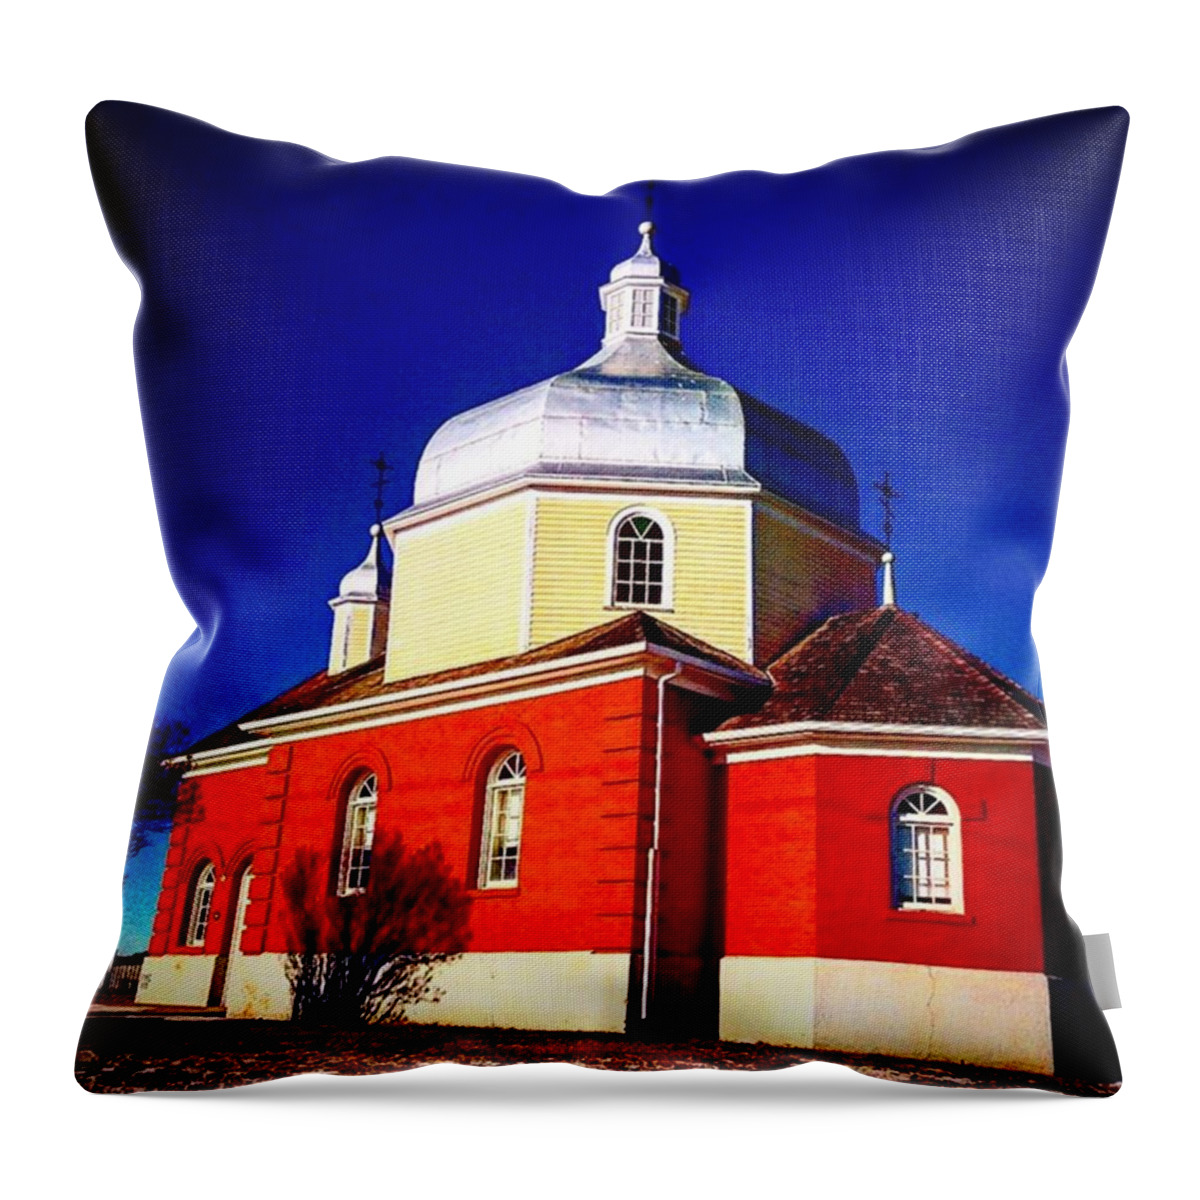 Beautiful Throw Pillow featuring the photograph The Red Church by Shawn Gordon